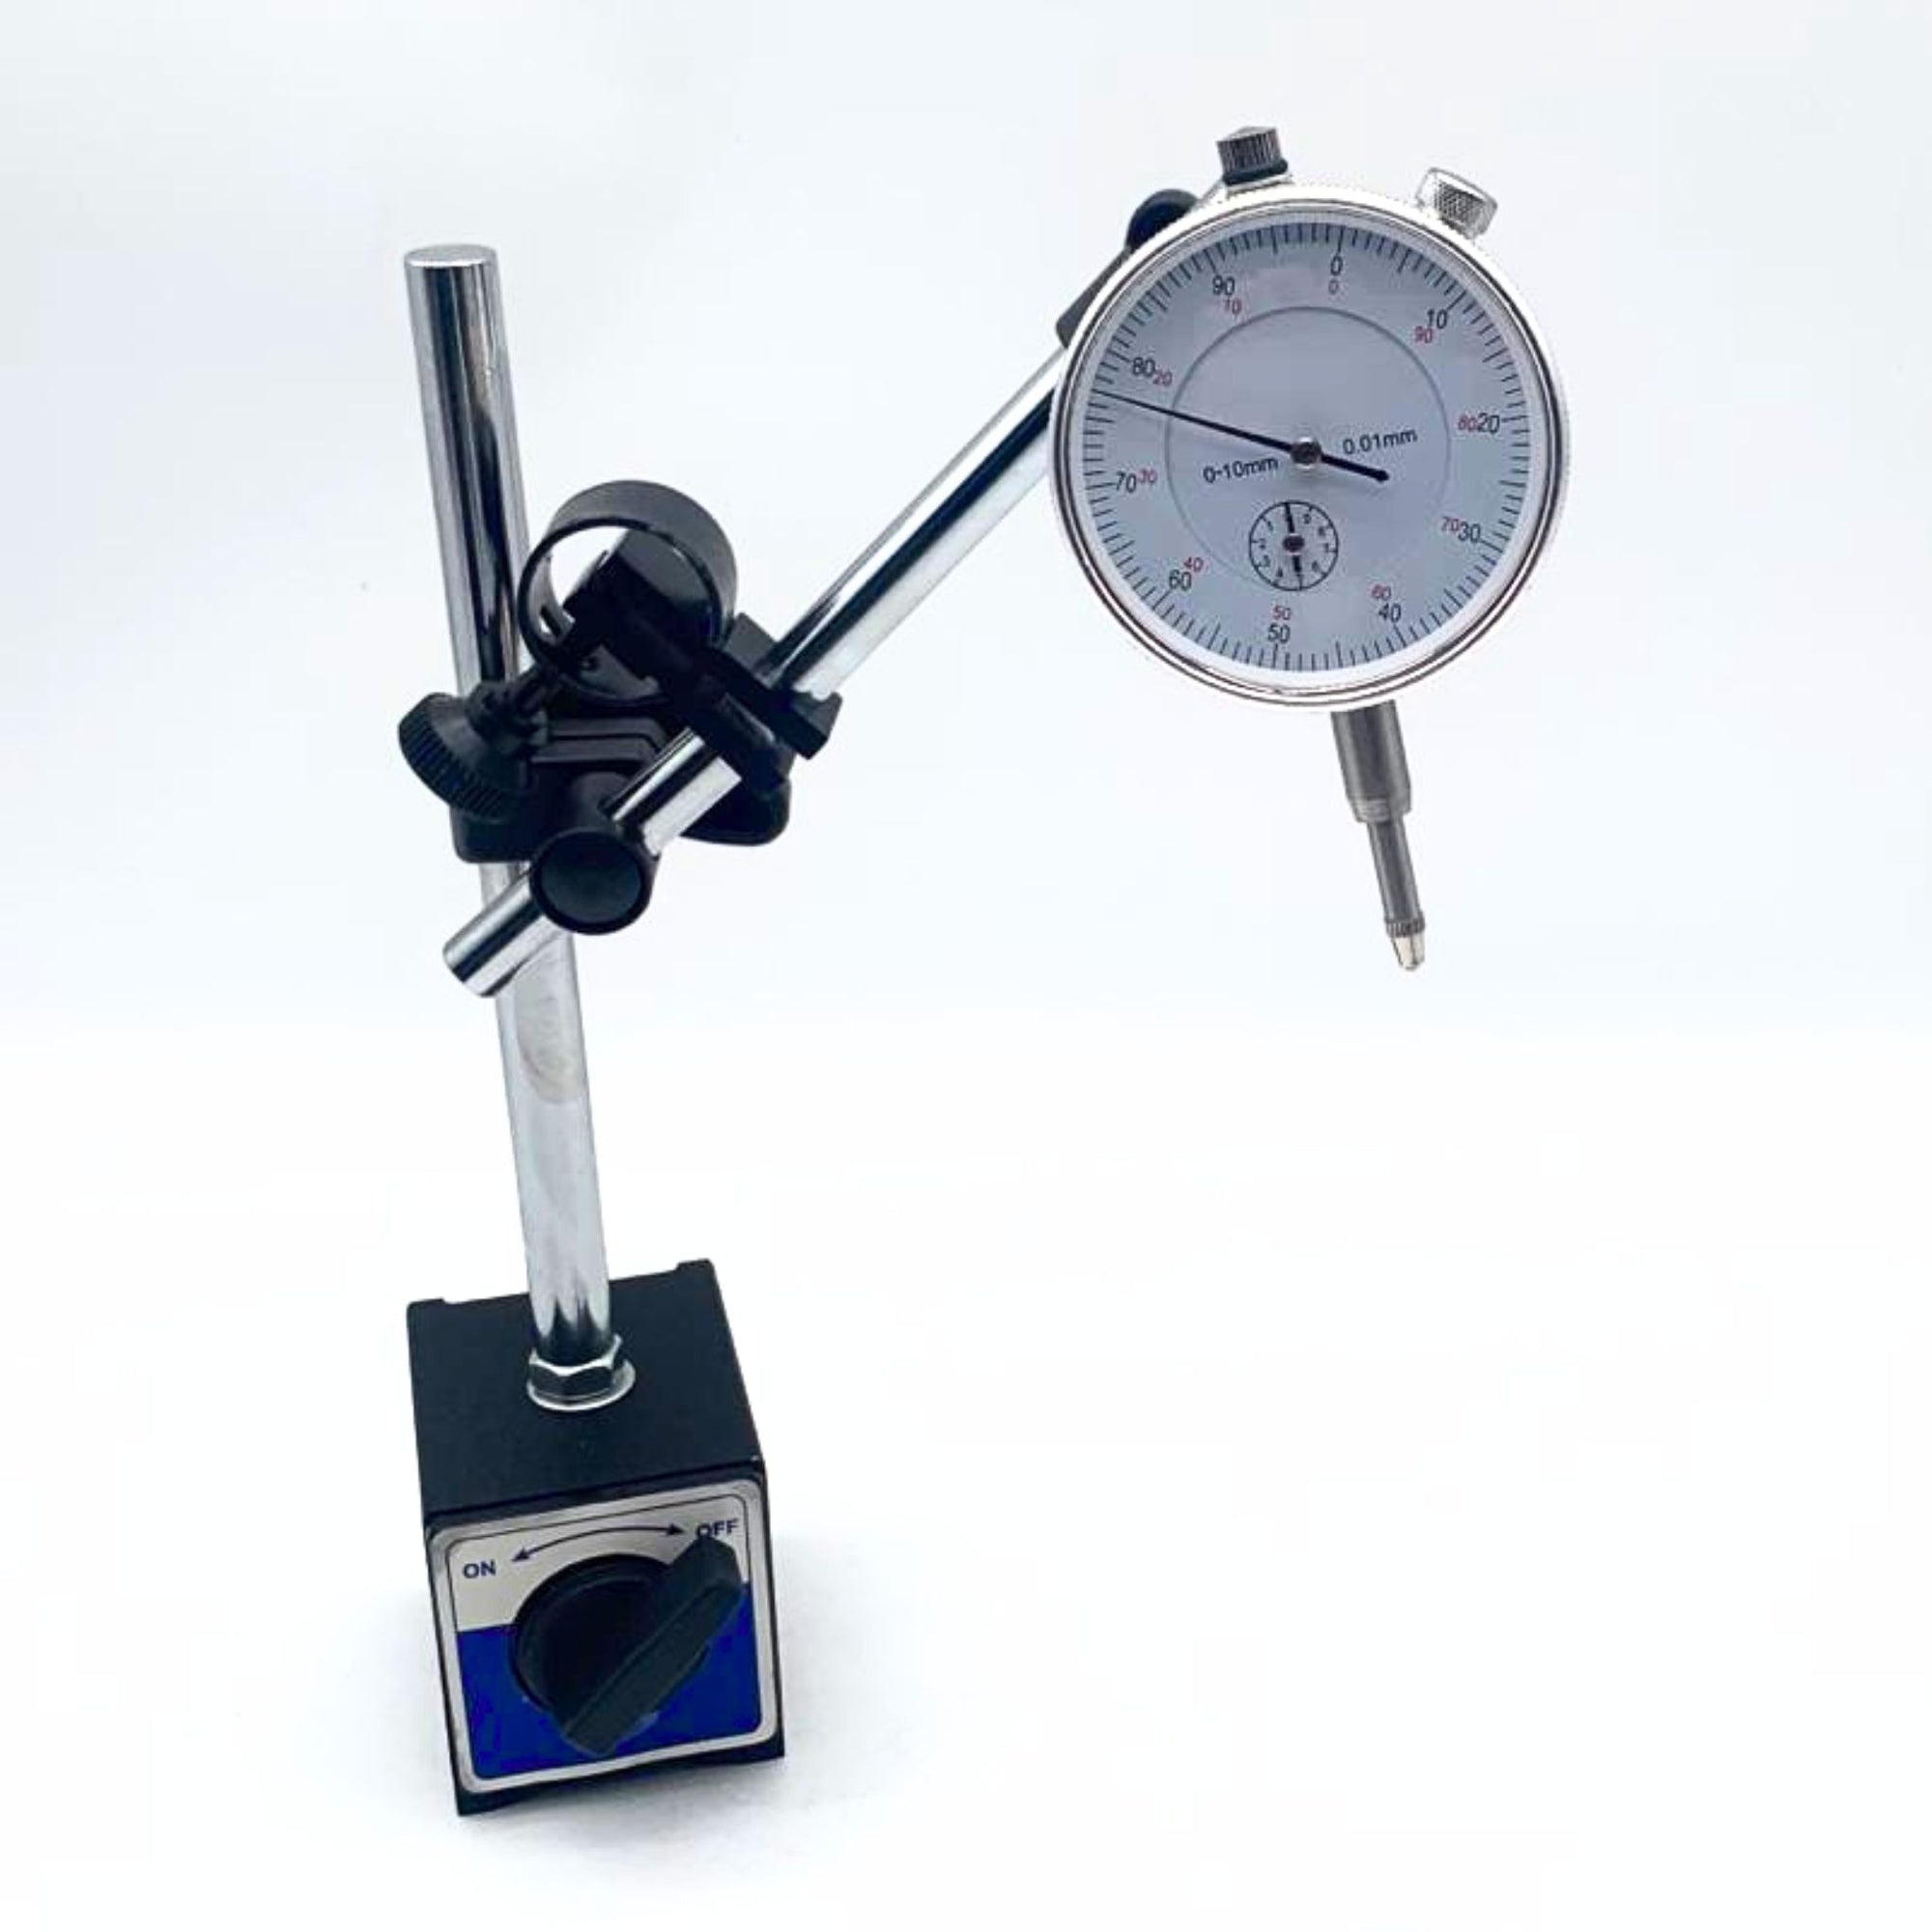 Professional 0-10mm Dial Indicator Gauge with Magnetic Base & - South East Clearance Centre